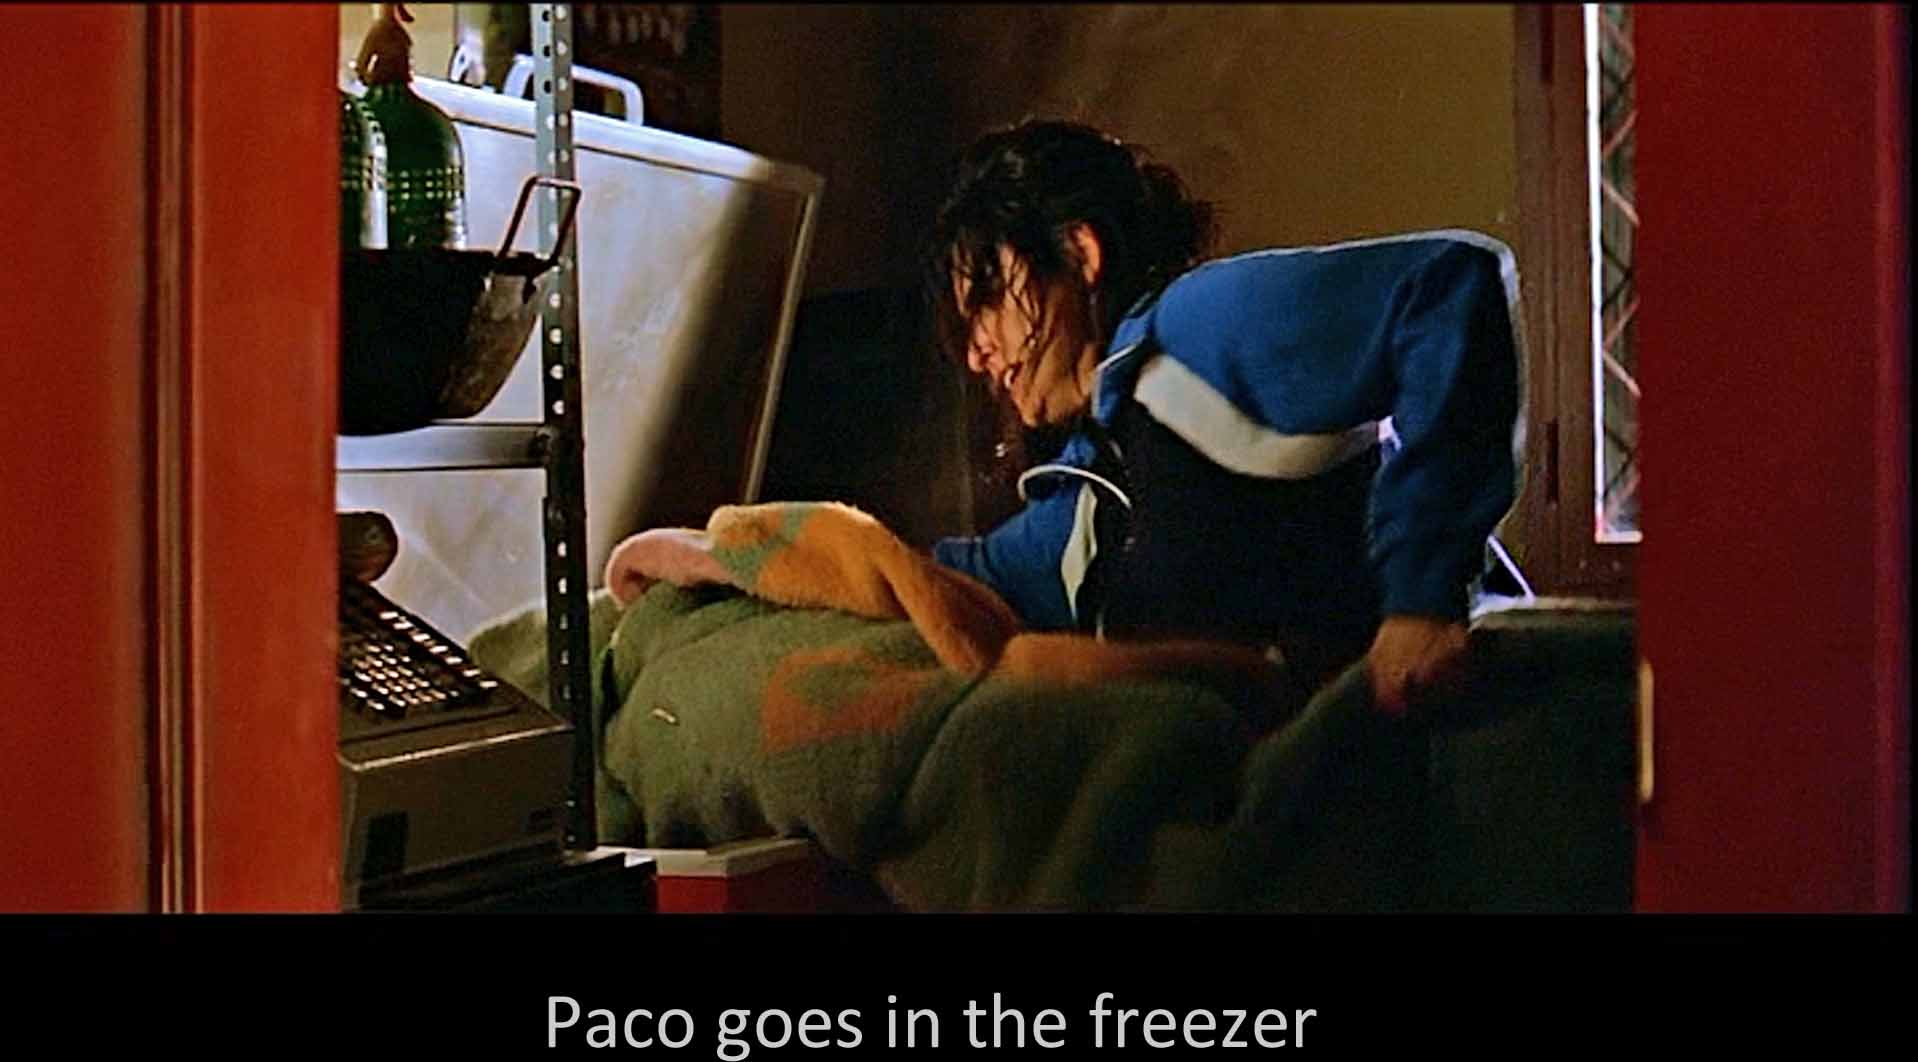 Paco goes in the freezer